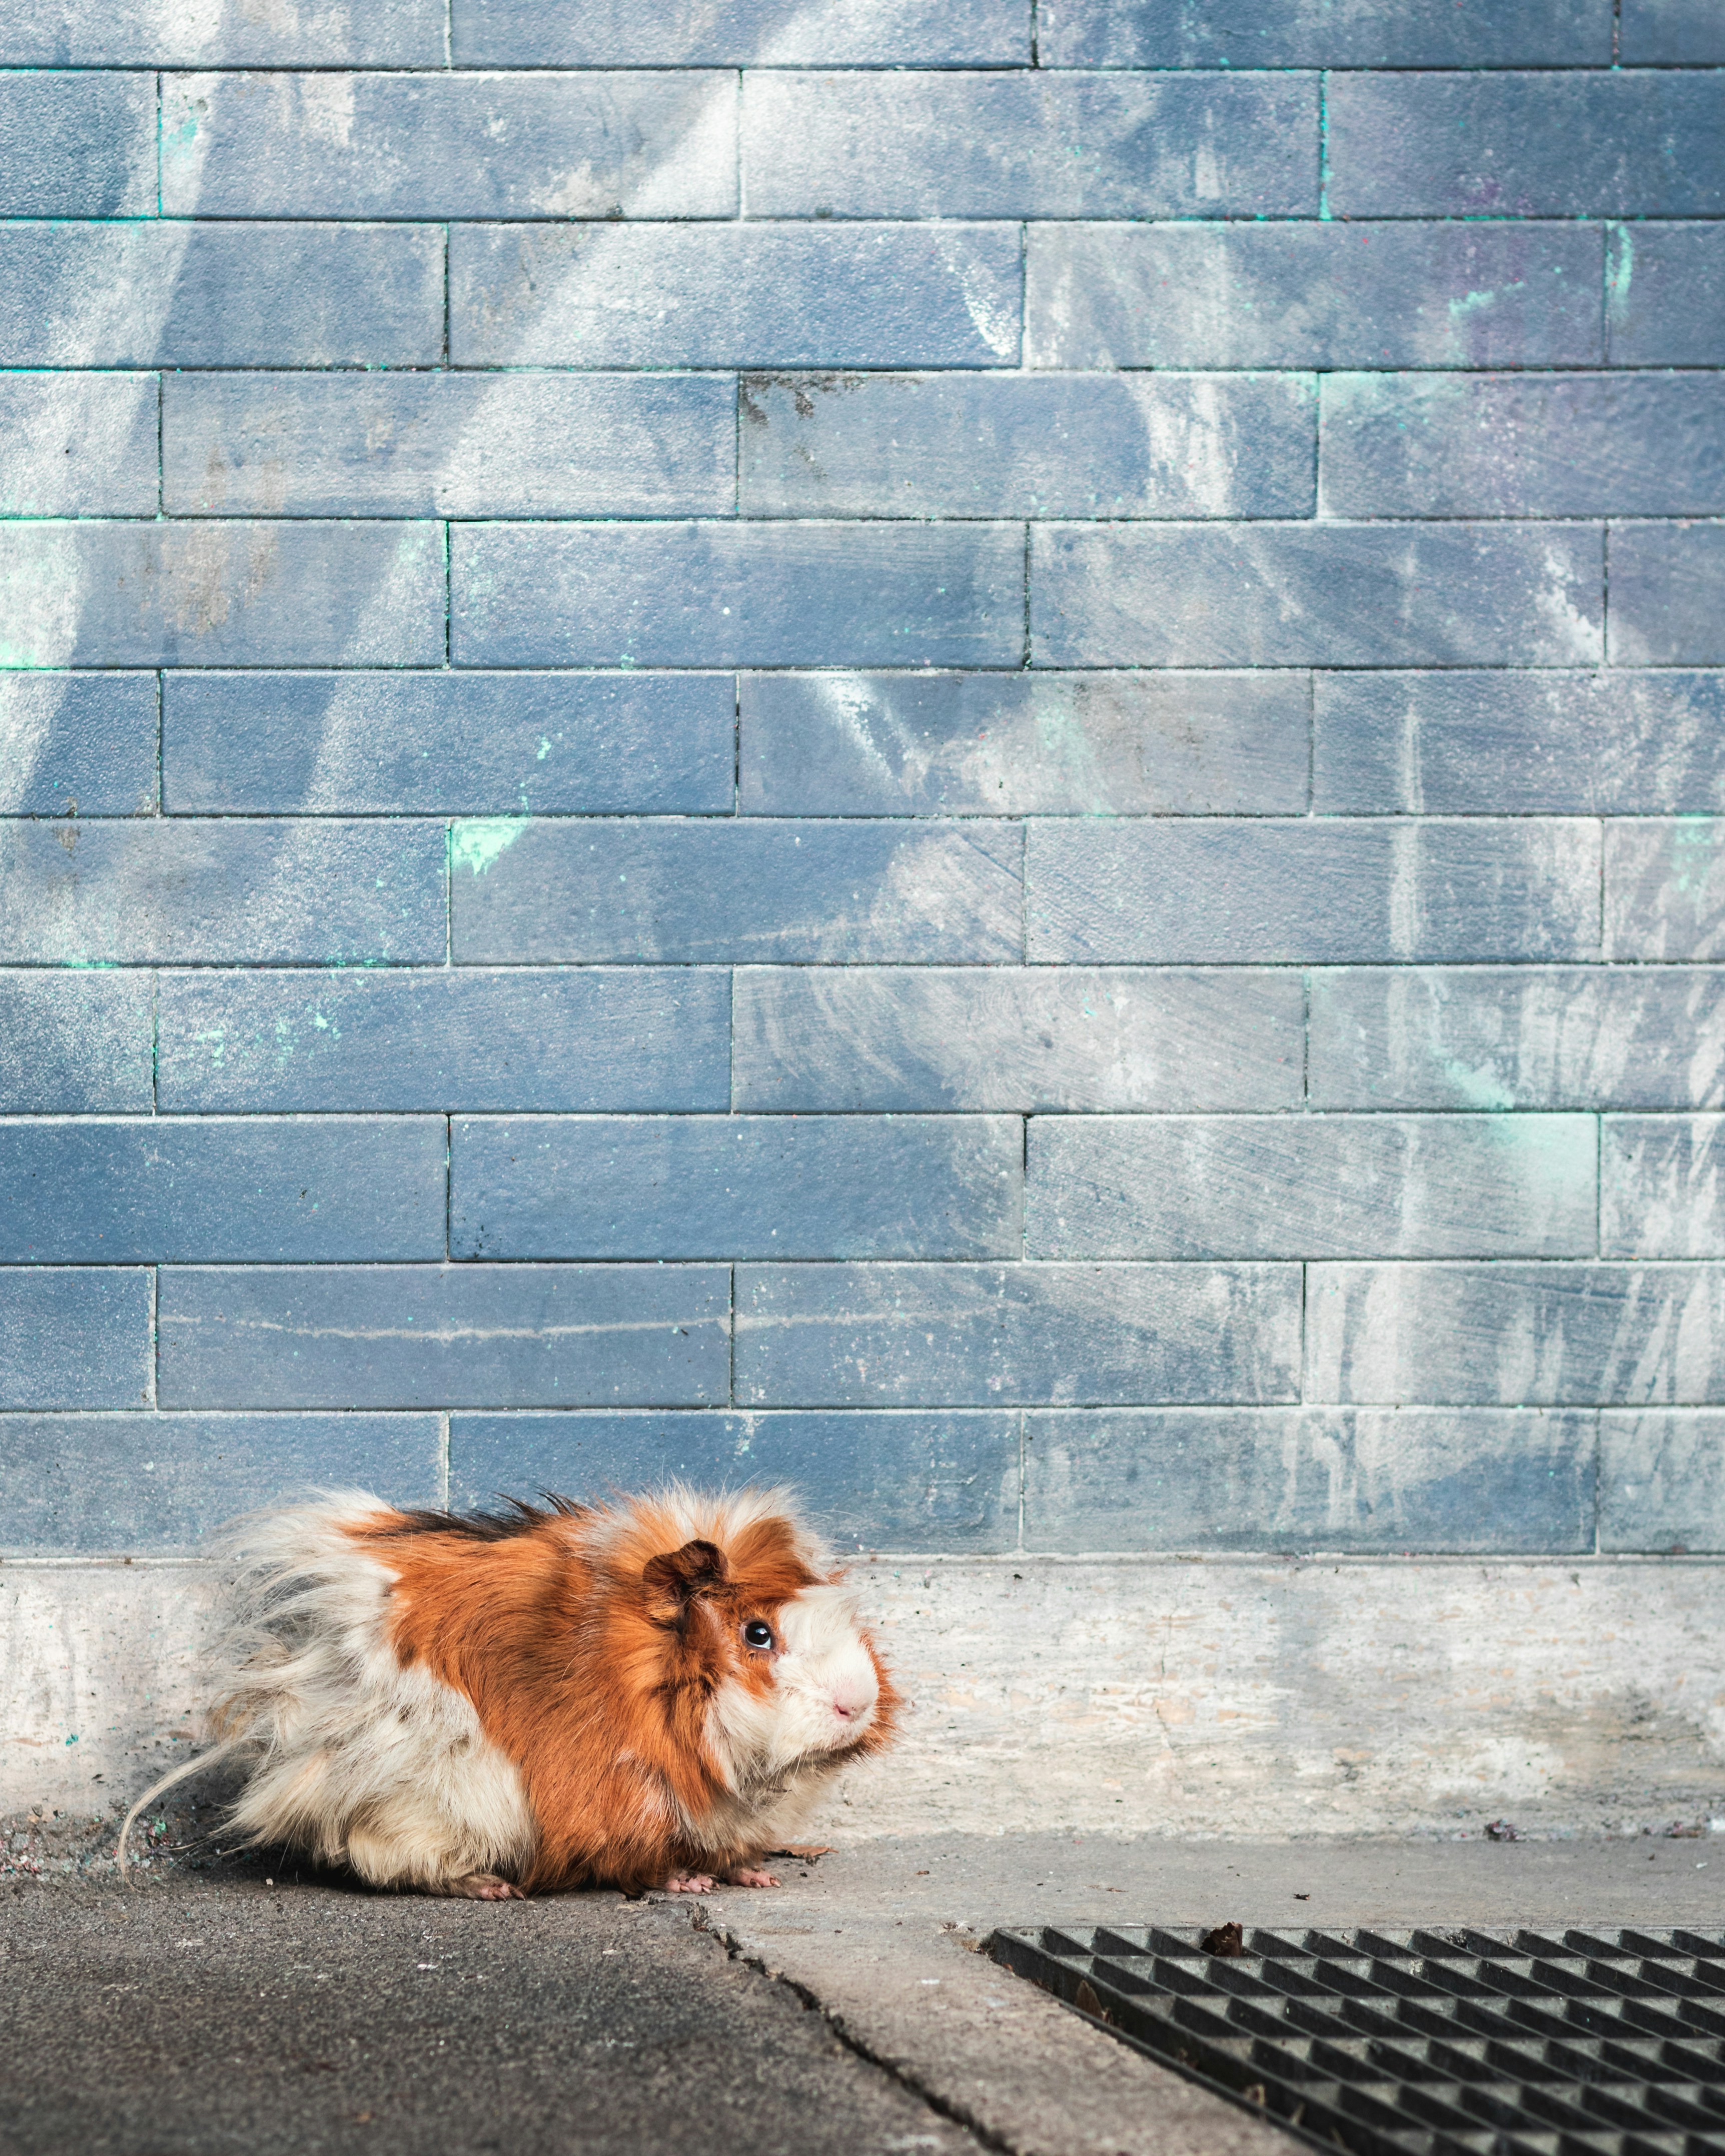 brown and white guinea pig walking by the grey wall near the drain